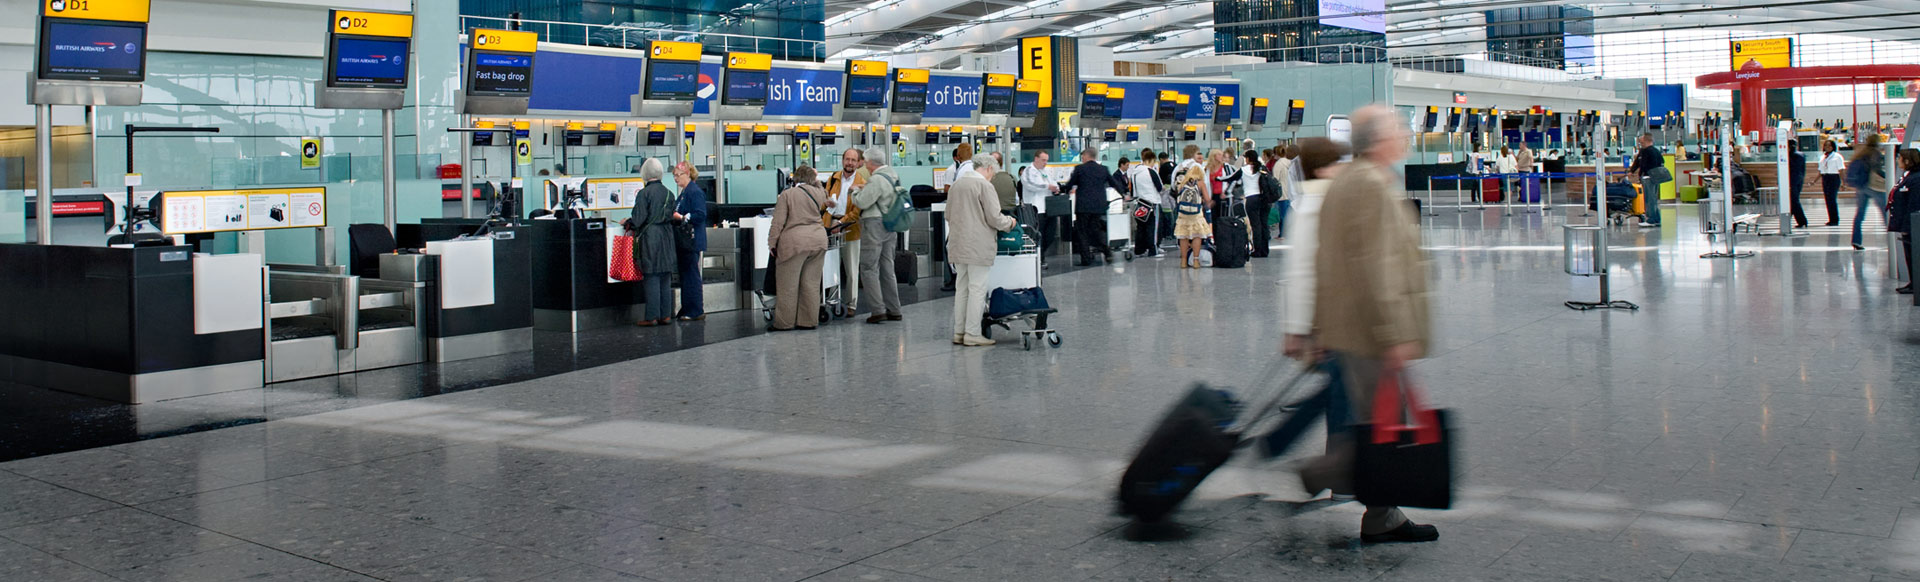 People checking in at London Heathrow Airport